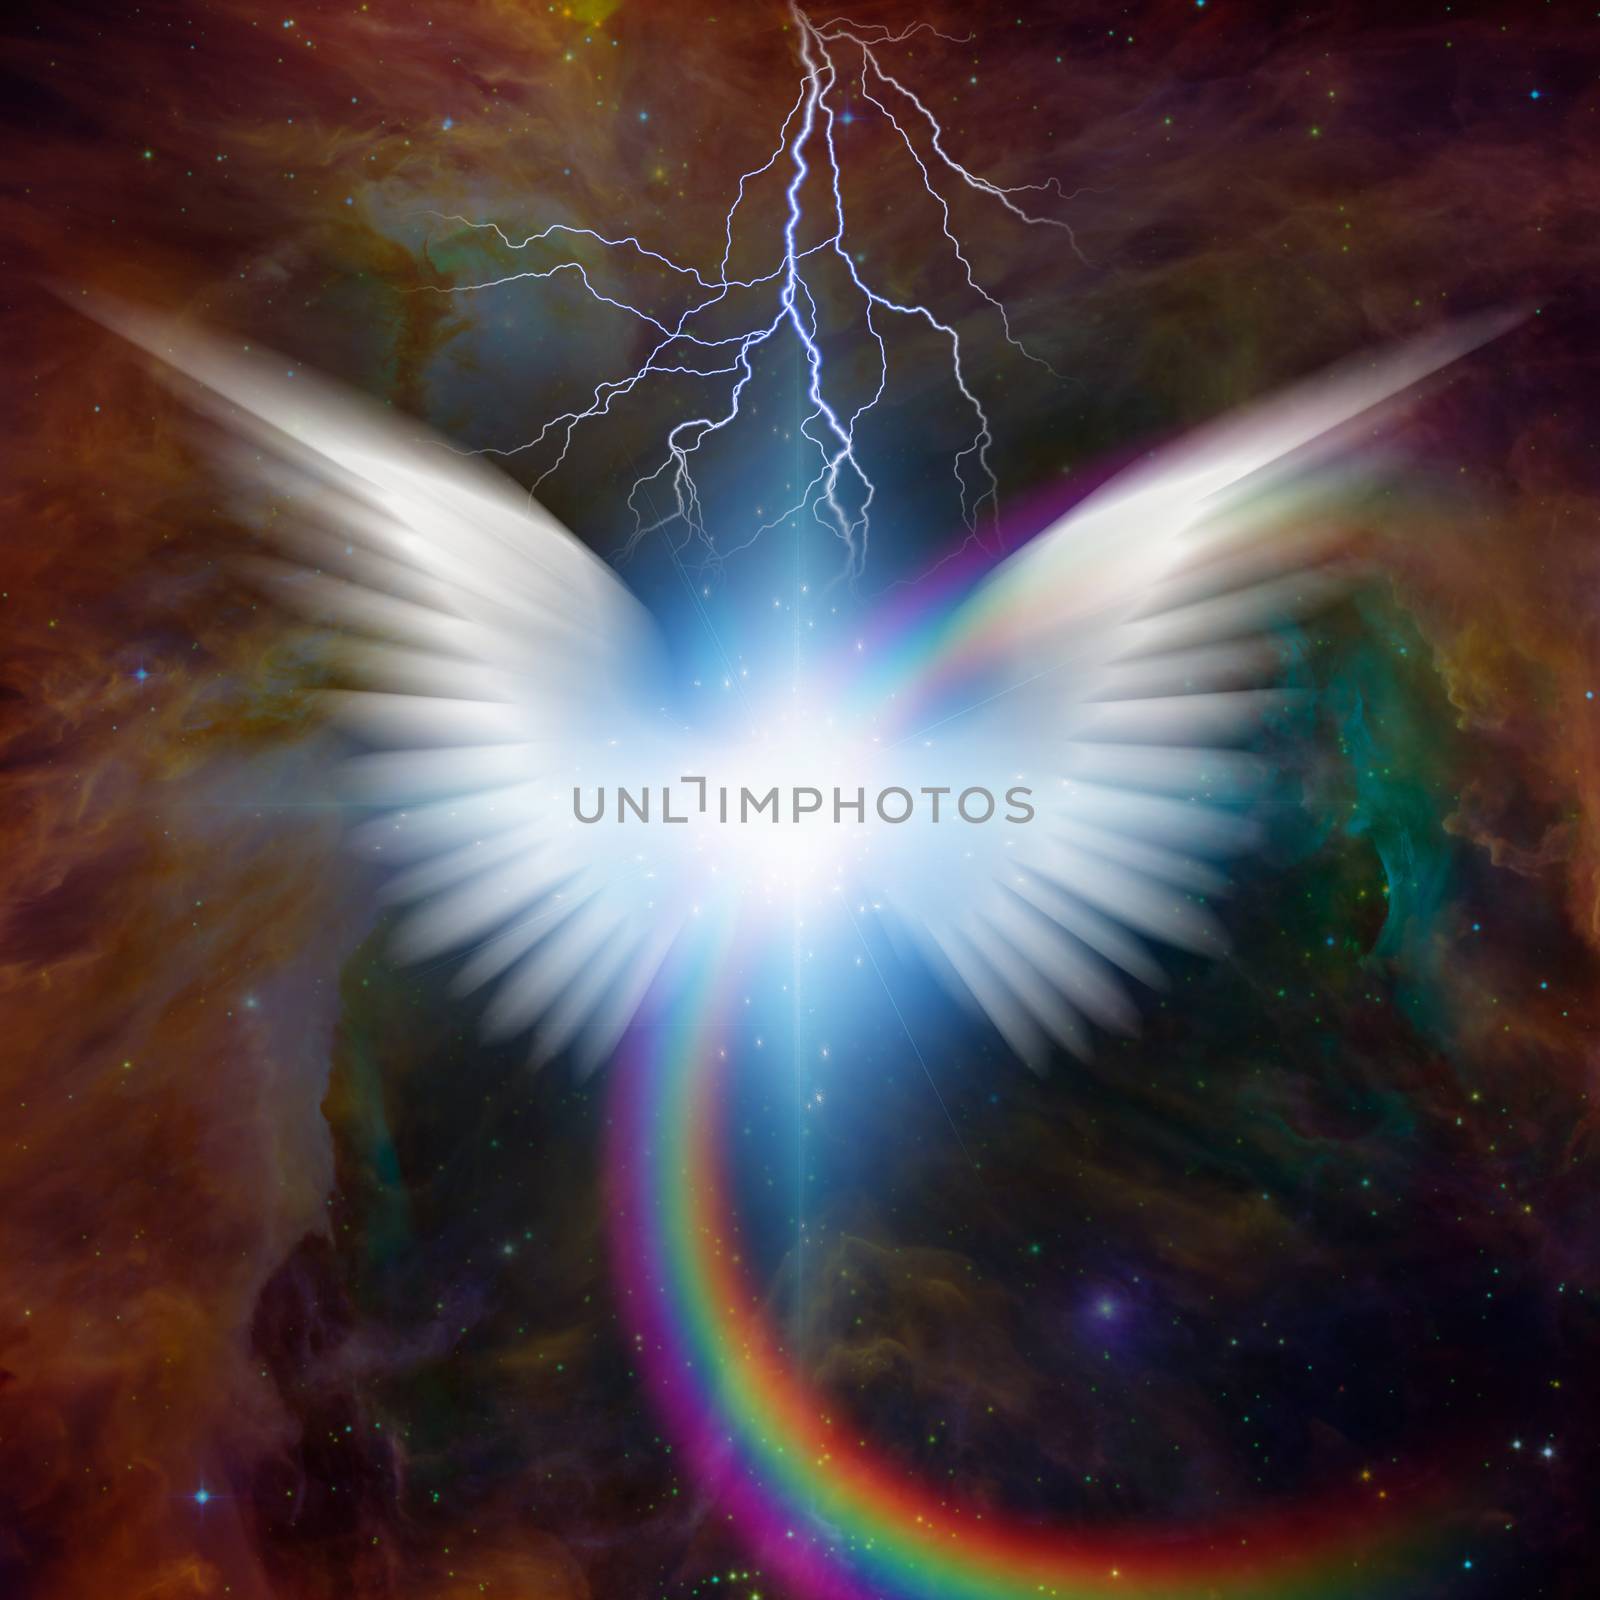 Surreal digital art. Bright star with white angel's wings. Rainbow and lightning